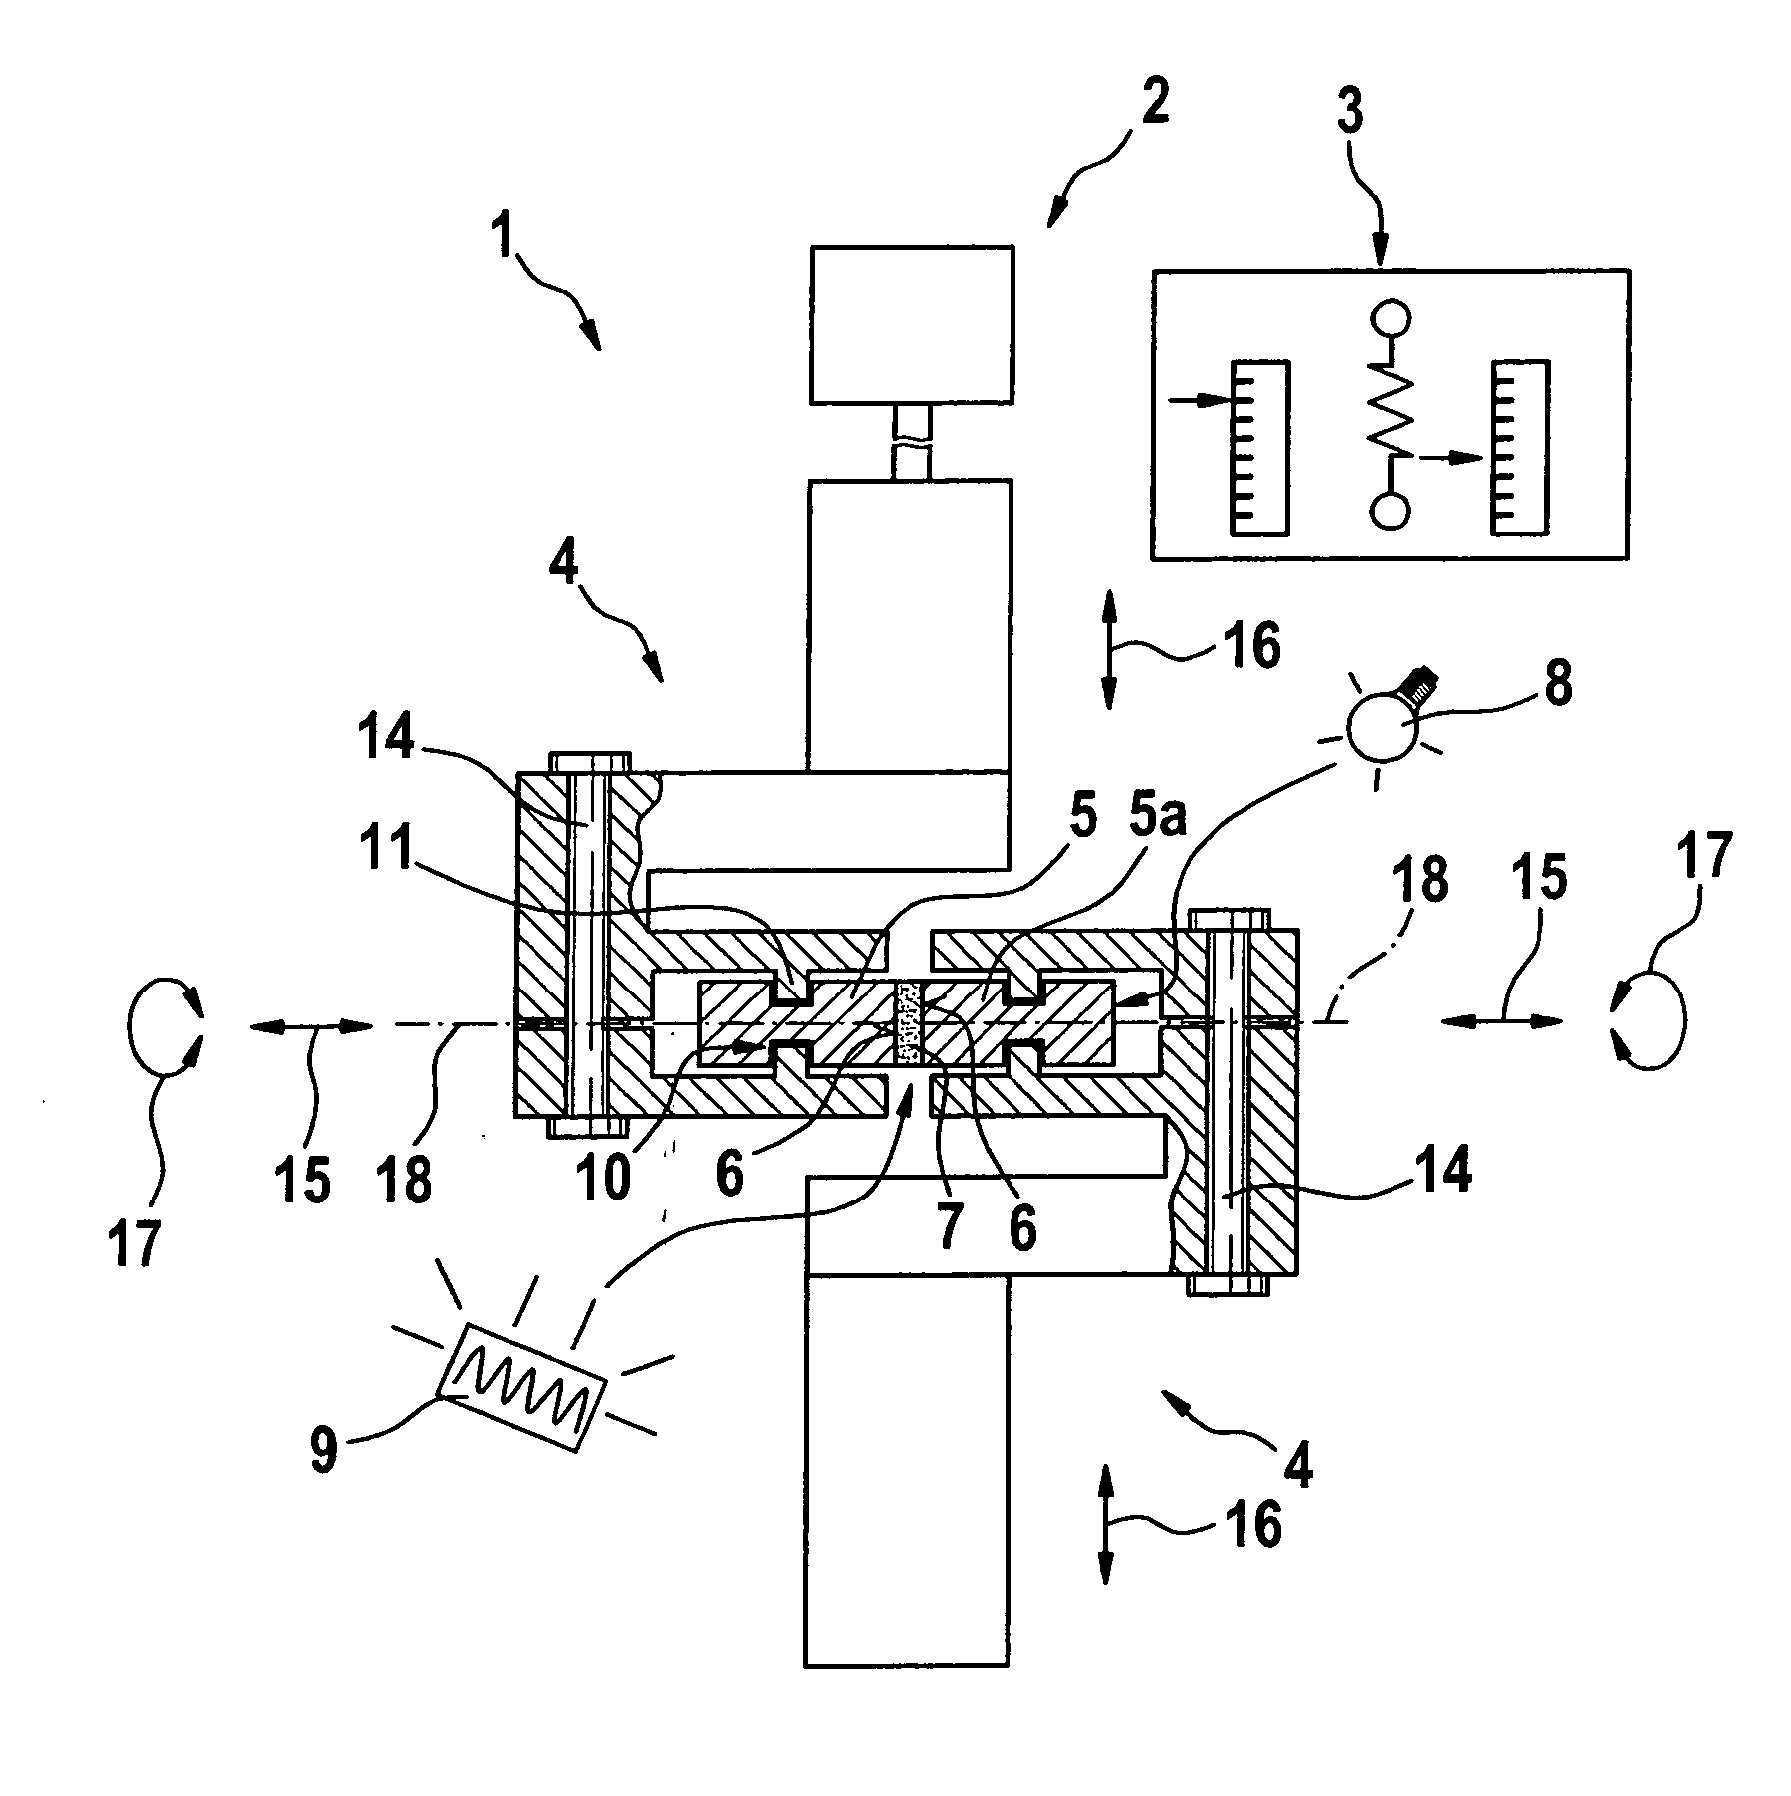 Device for testing material properties with regard to combined tensile and shear loads, in particular for testing adhesives